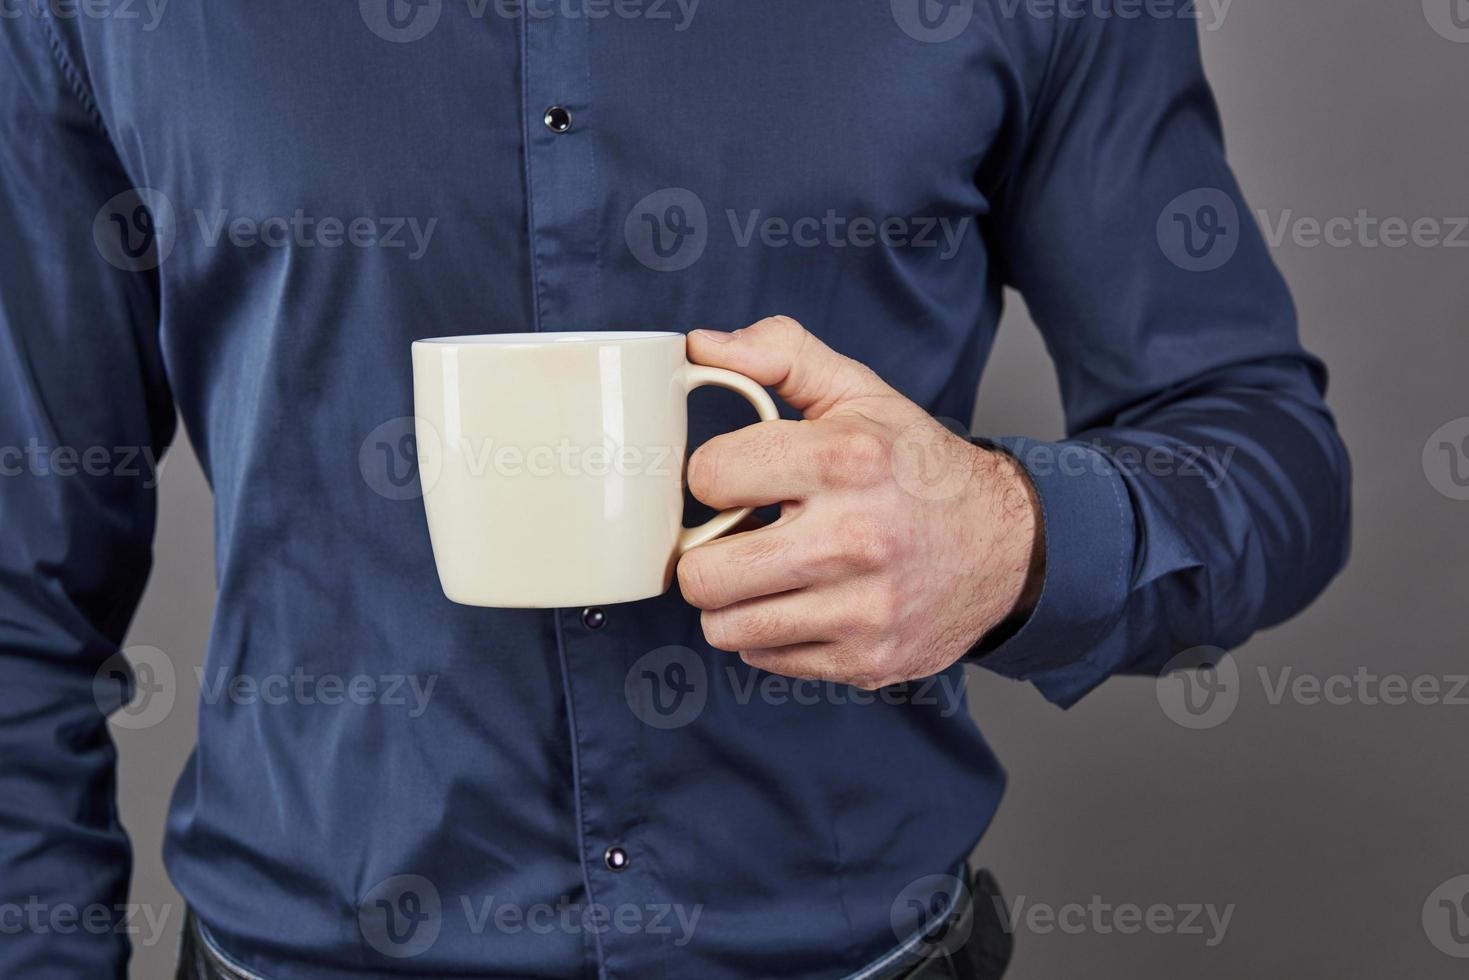 Handsome bearded man with stylish hair beard and mustache on serious face in shirt holding white cup or mug drinking tea or coffee in studio on grey background photo